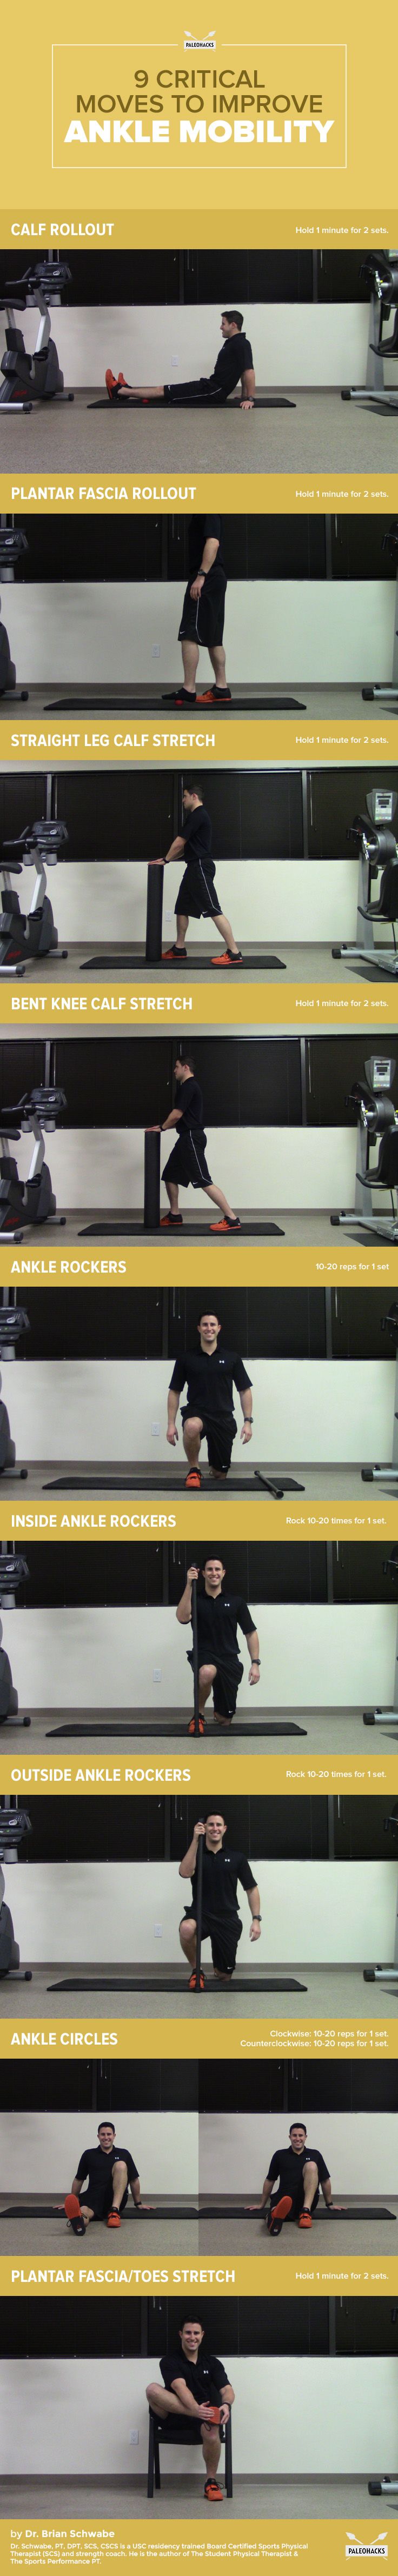 9_Critical_Moves_to_Improve_Ankle_Mobility-infographic